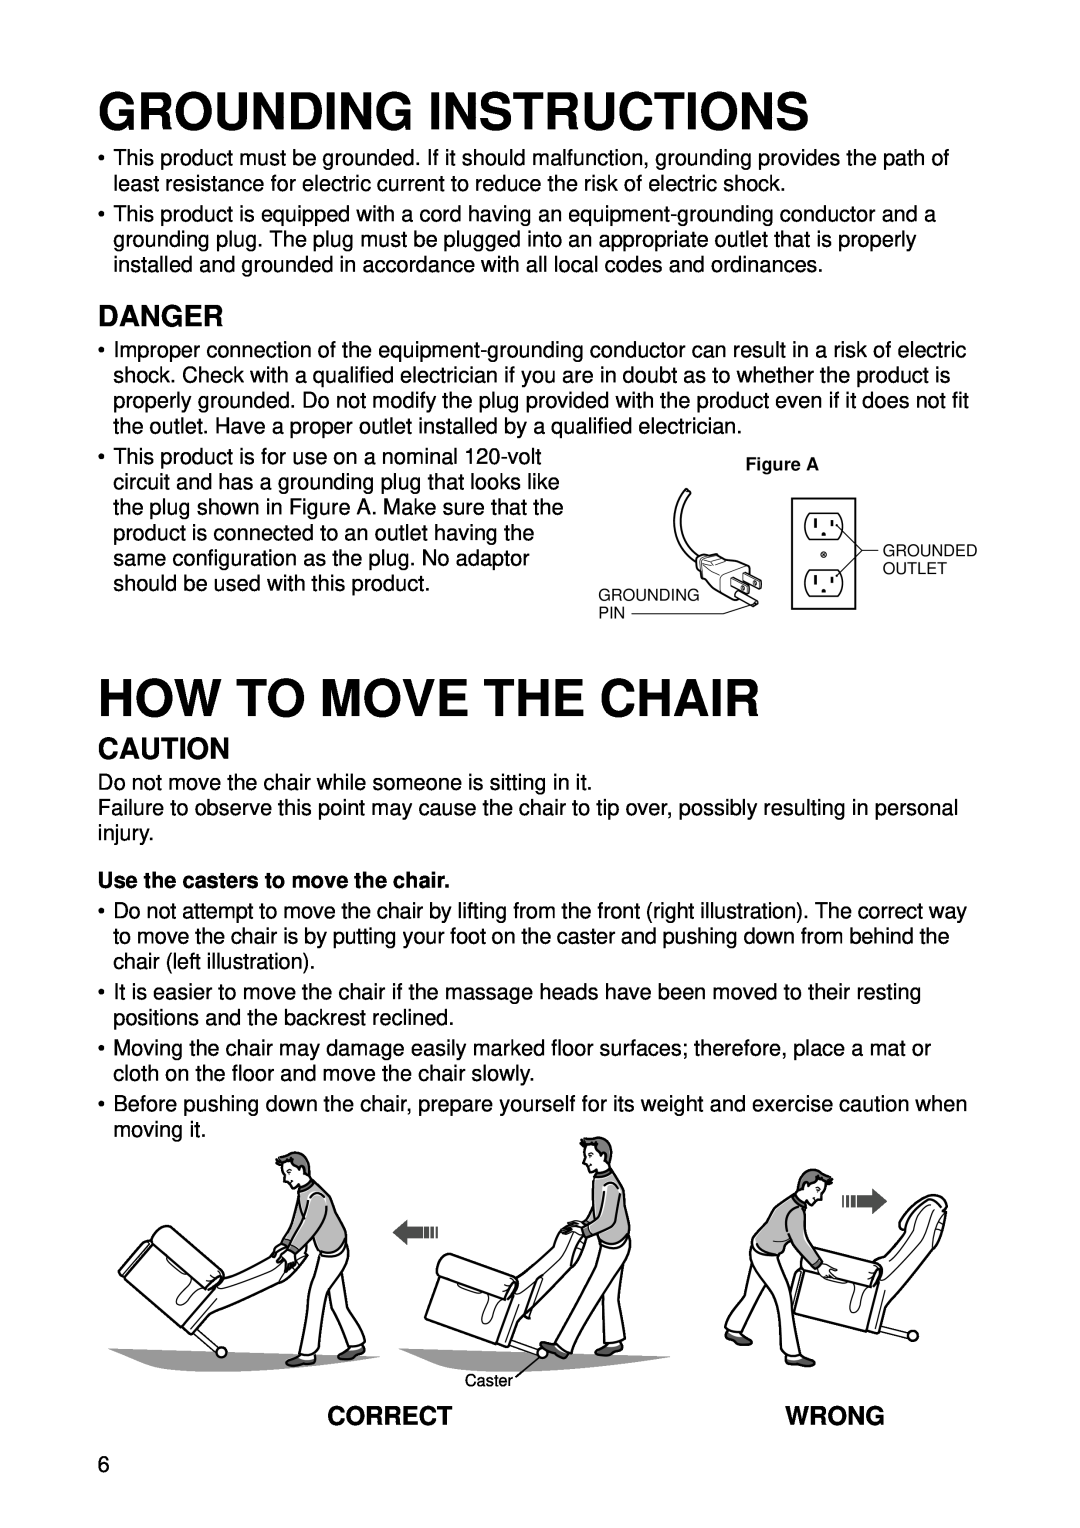 Panasonic EP1015 Grounding Instructions, How To Move The Chair, Danger, Correct, Wrong, Use the casters to move the chair 